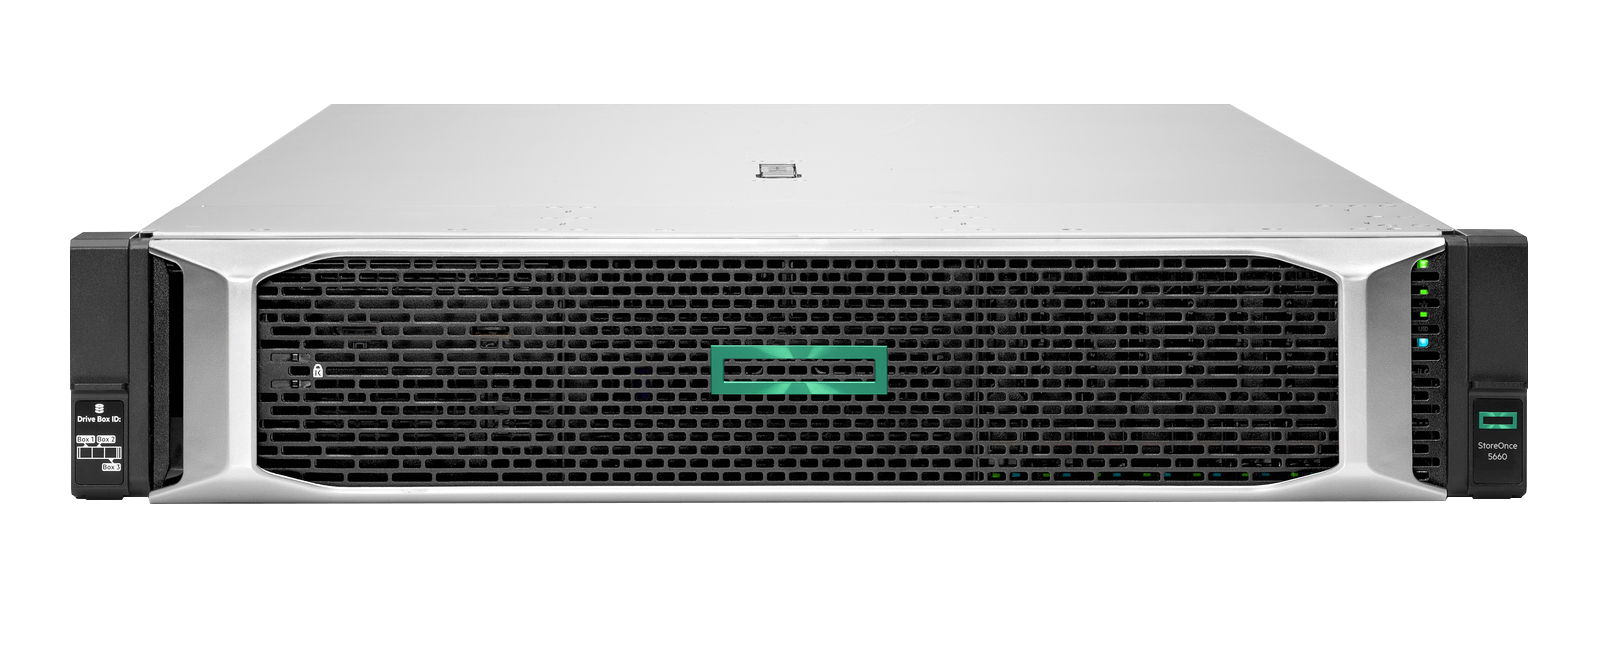 Hpe storeonce 5660